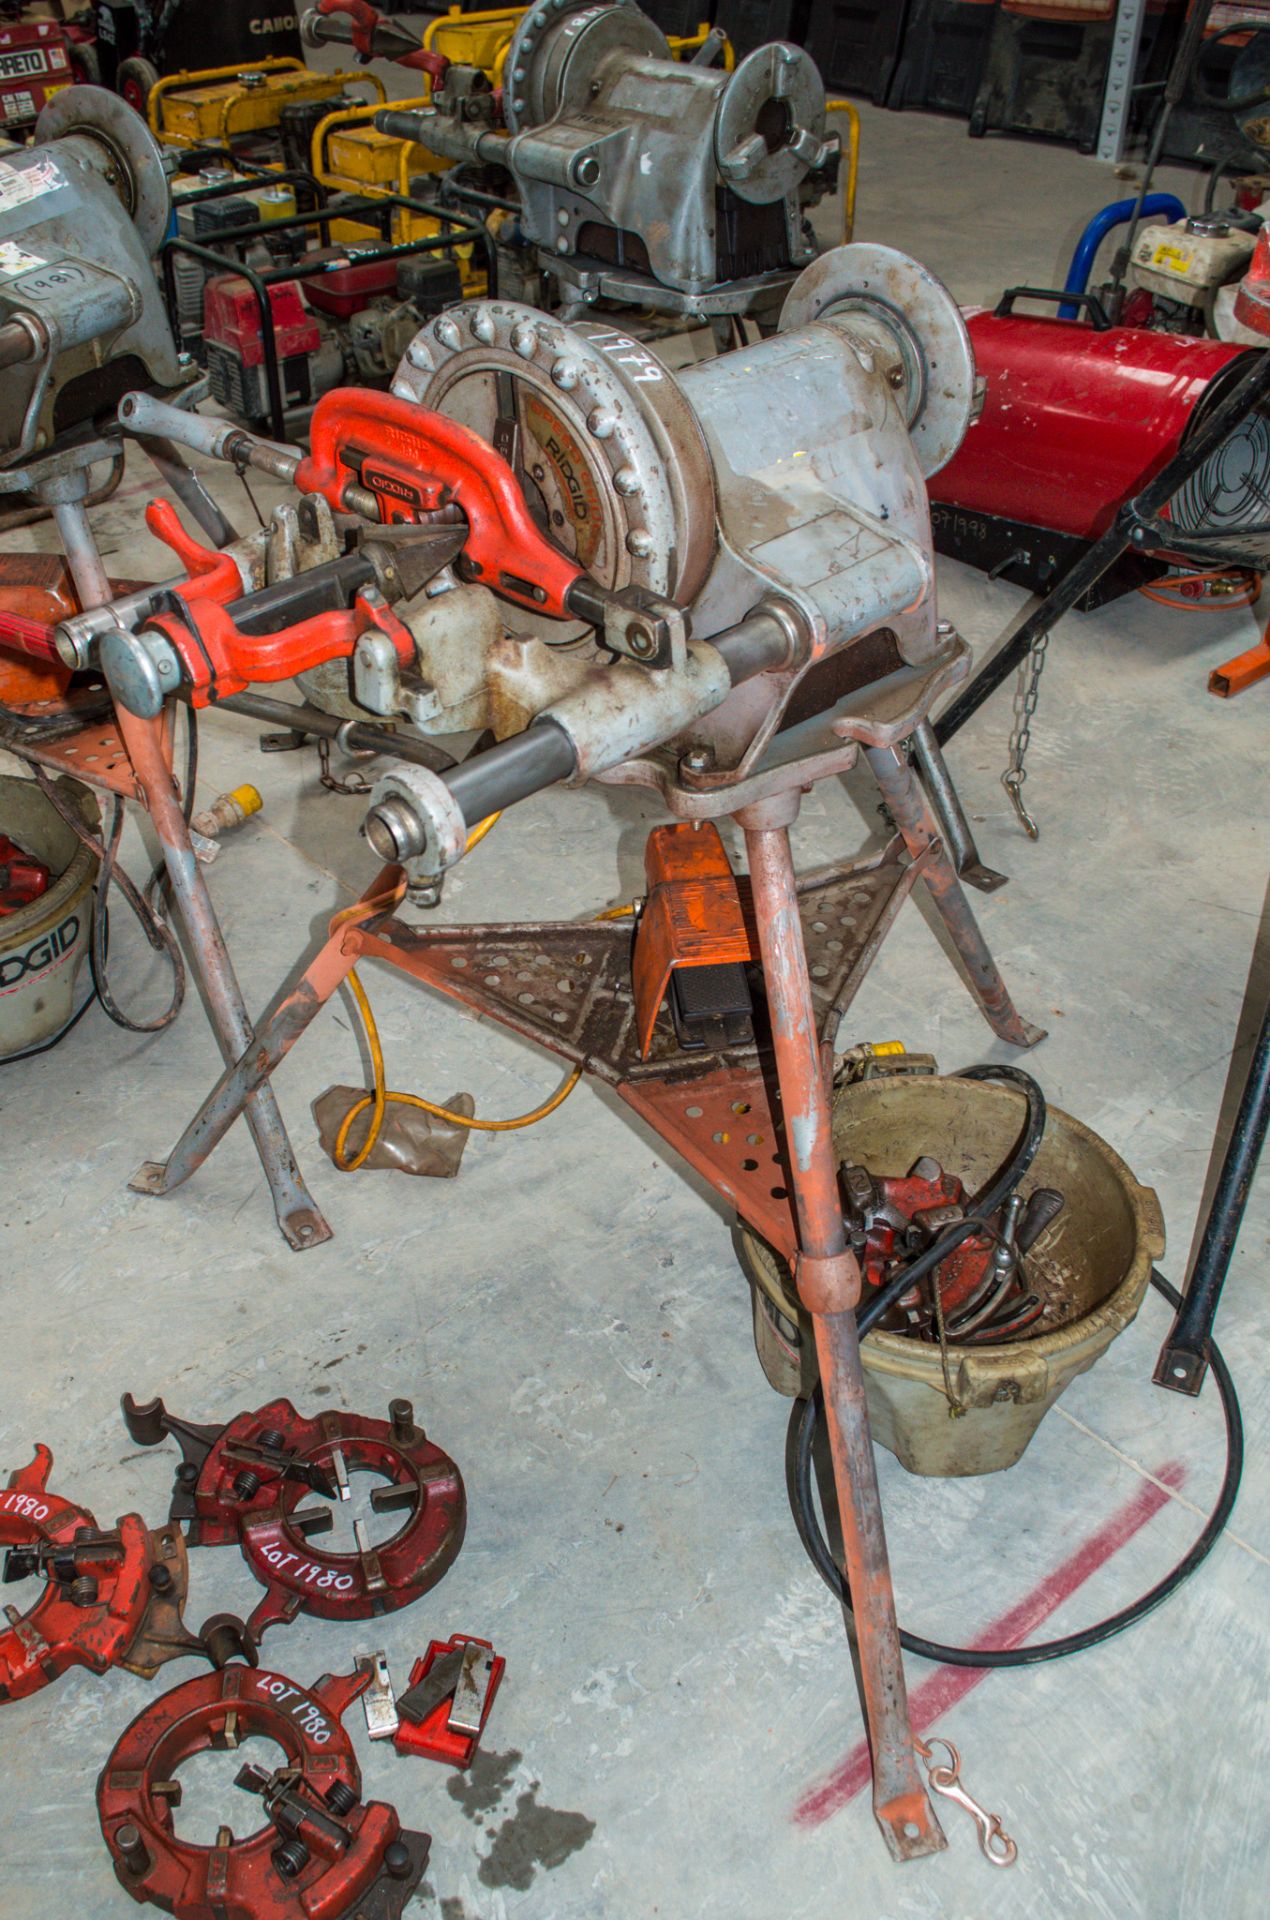 Ridgid 300 110 volt pipe threading machine c/w stand, oil bucket, 2 threading heads and foot pedal